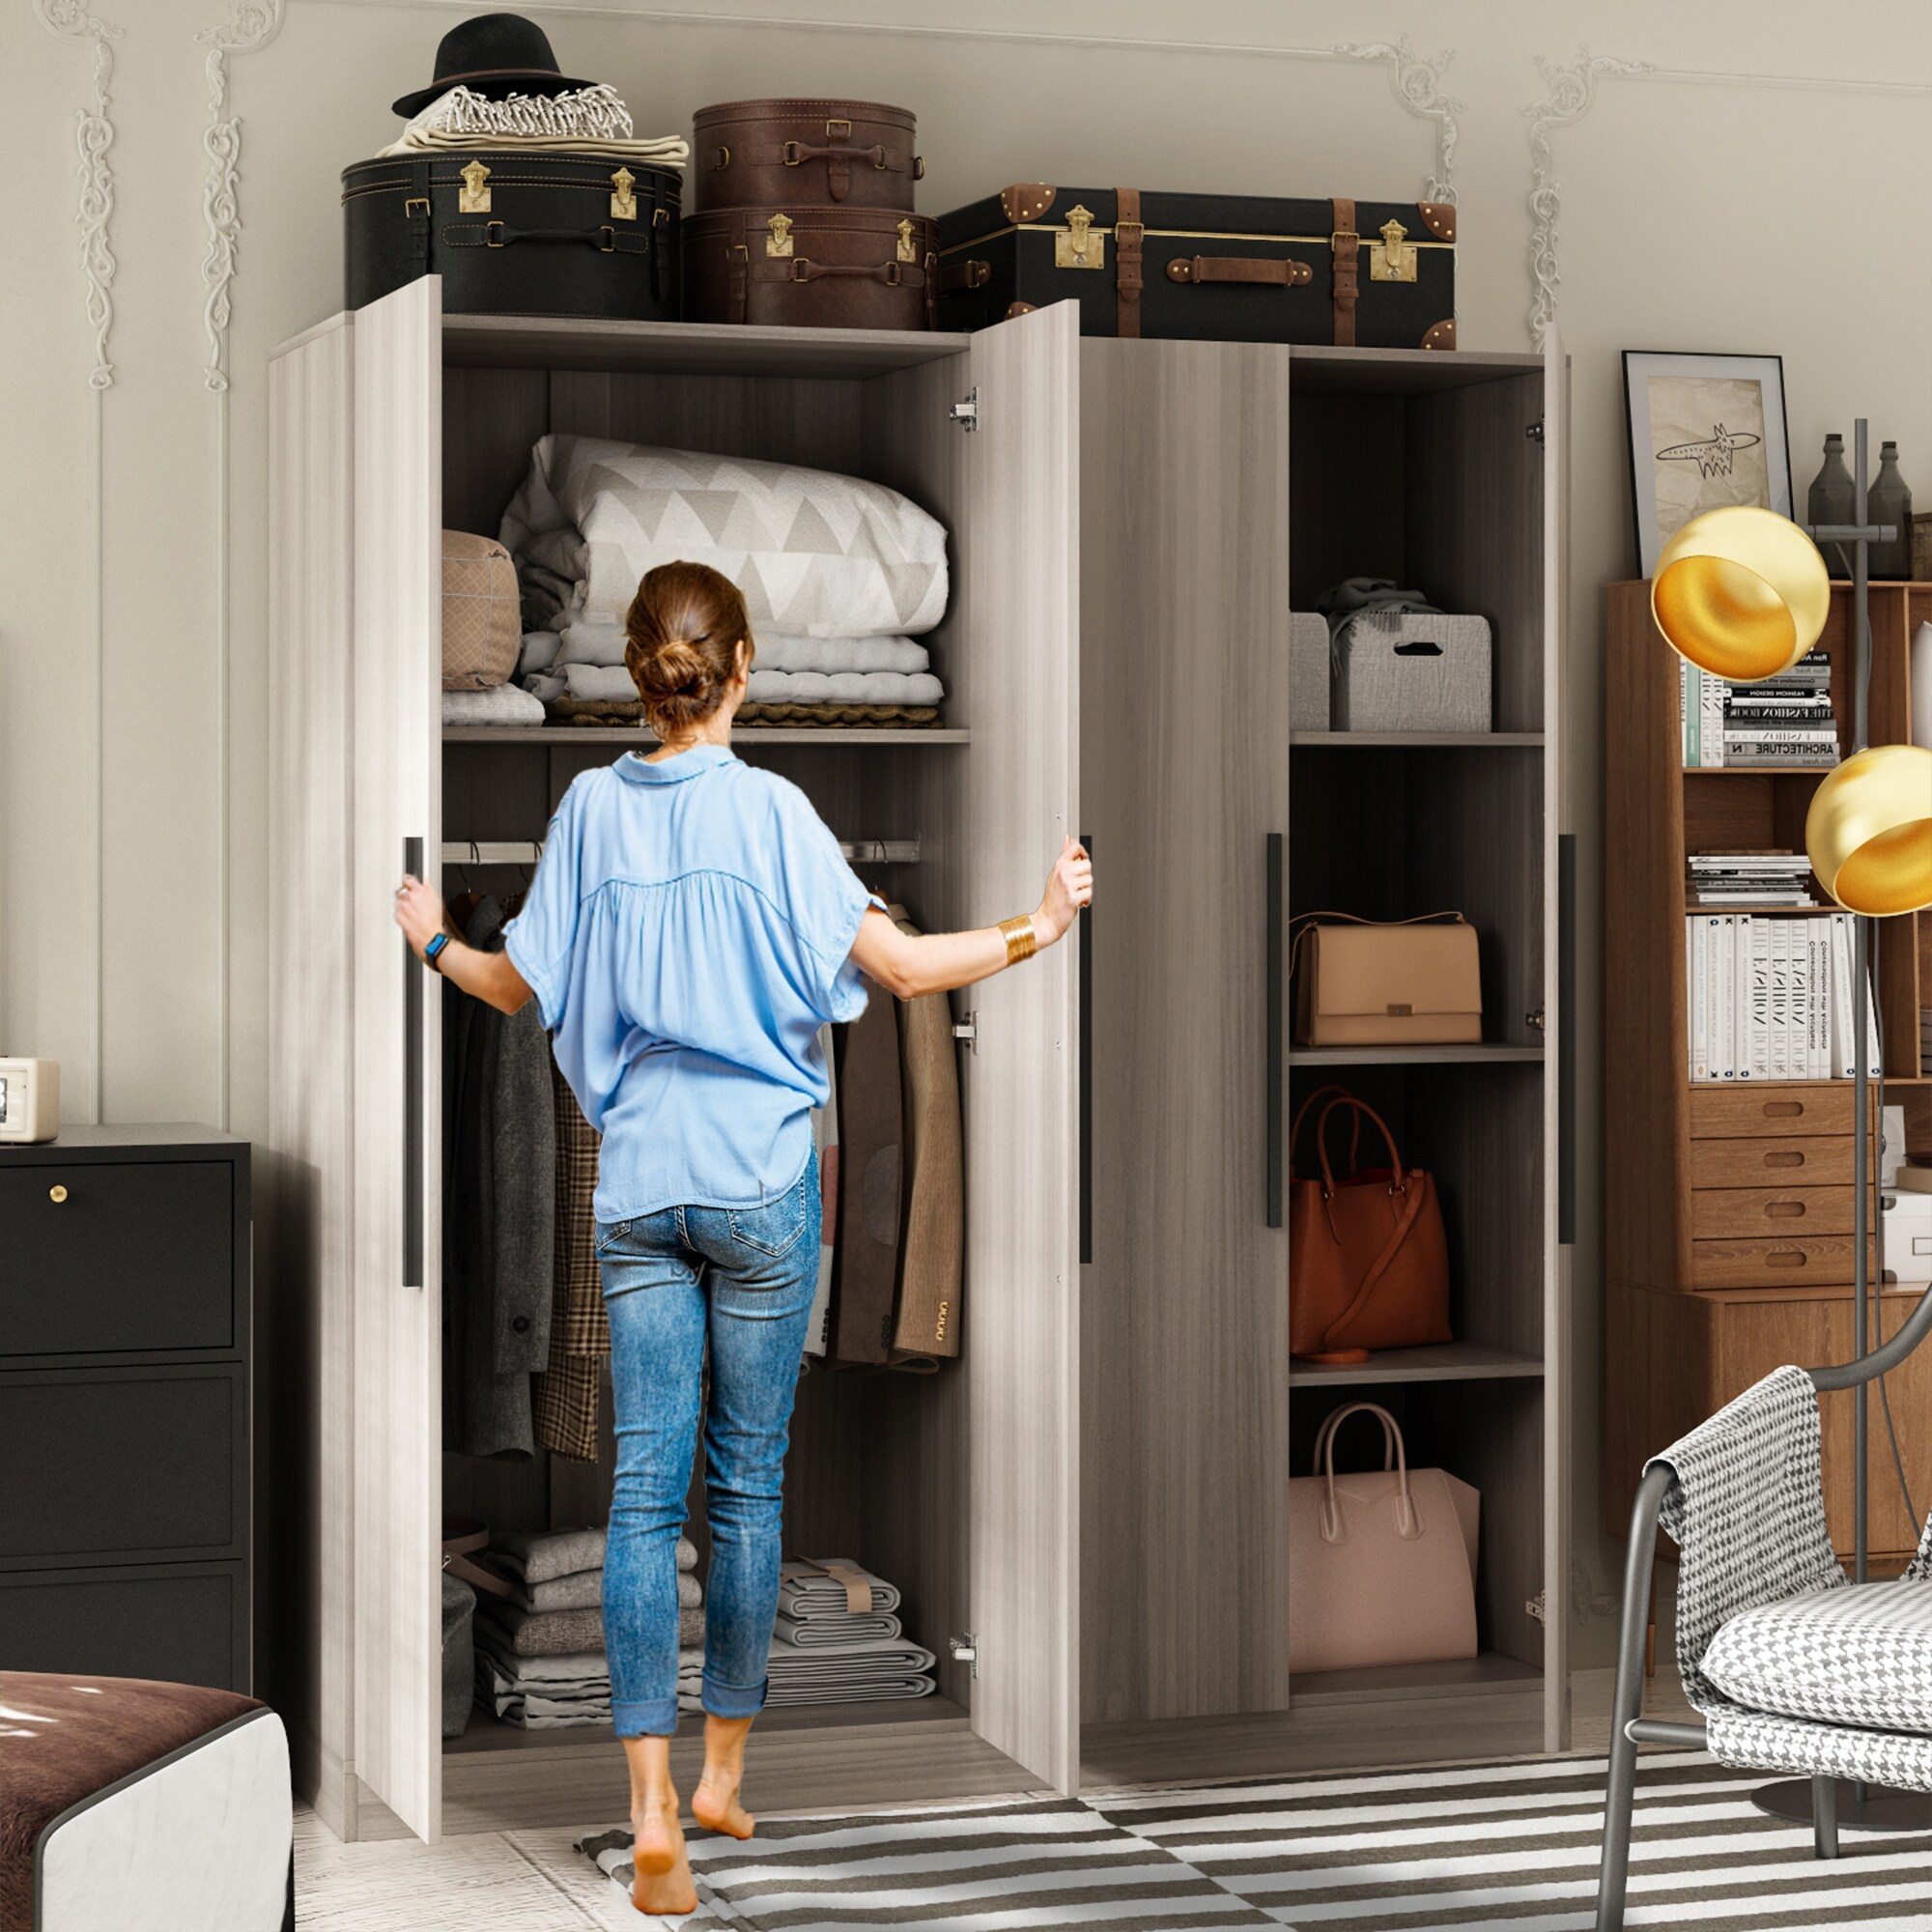 https://ak1.ostkcdn.com/images/products/is/images/direct/22ae1abd2812d85d82a378b5a694237fd284ea61/FAMAPY-Large-Armoire-Wardrobe-Closet-Cabinet-4-Doors.jpg